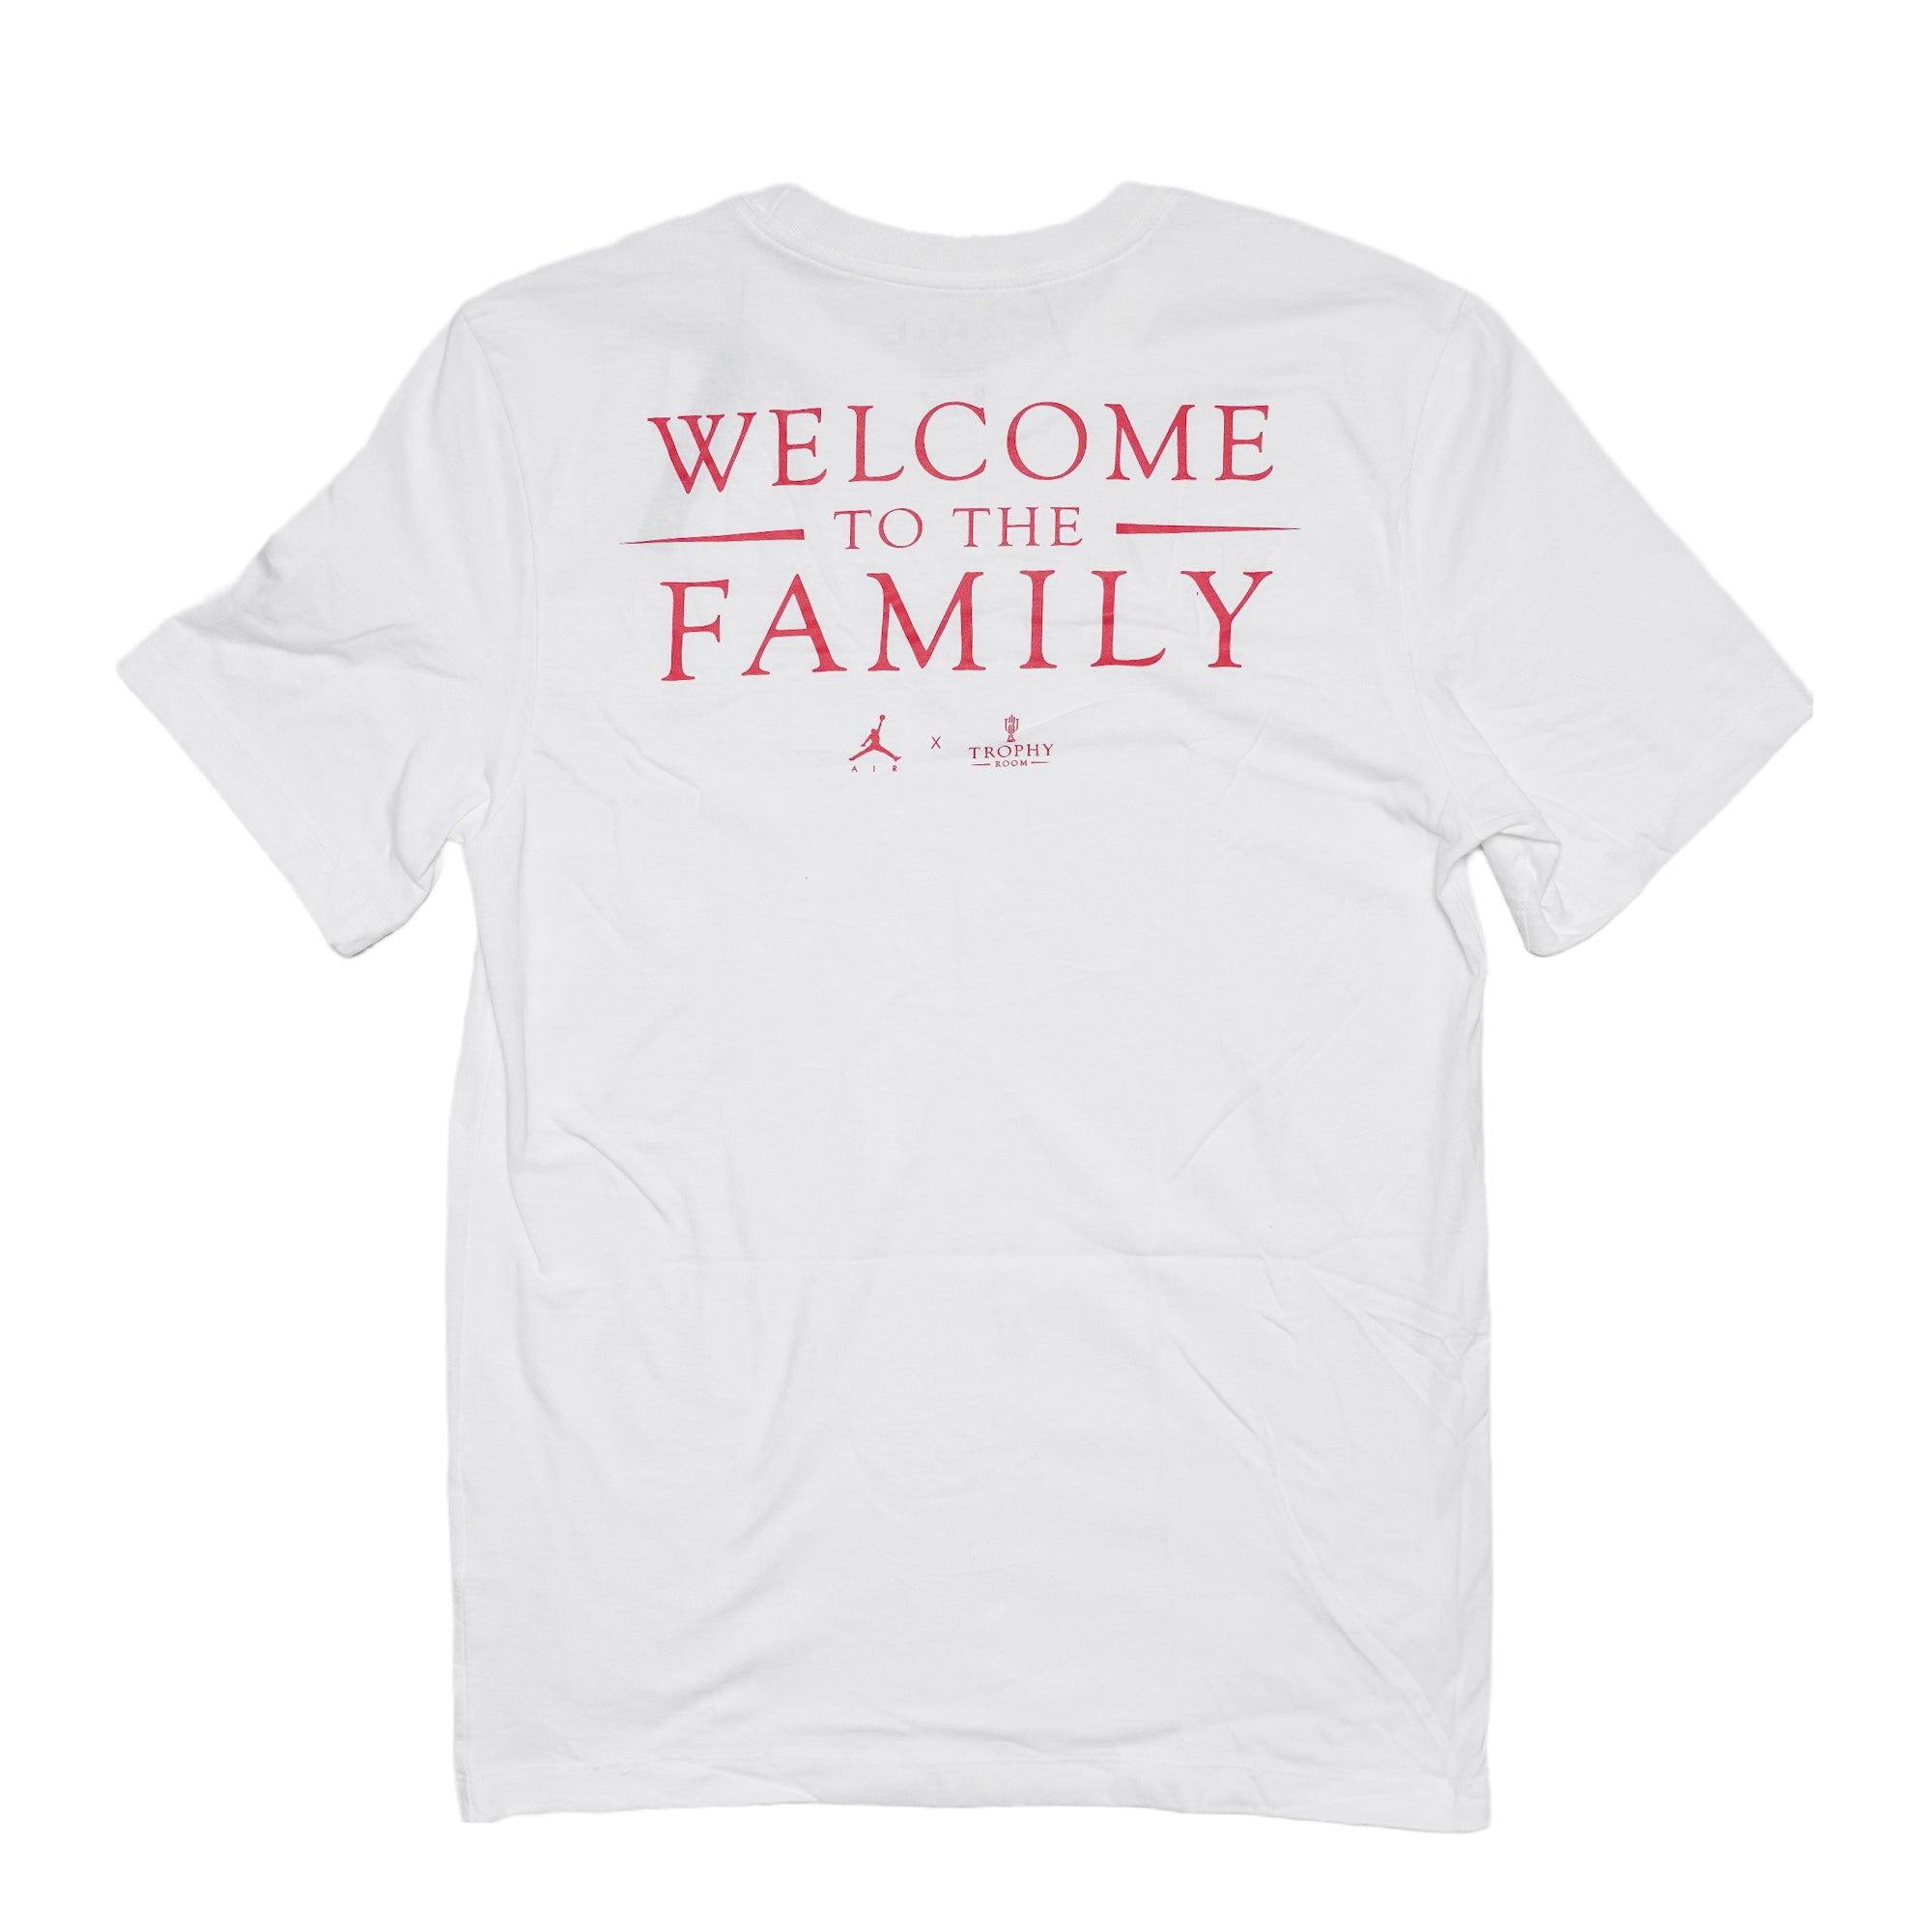 Trophy Room MJ 'Welcome To The Family' White Tee